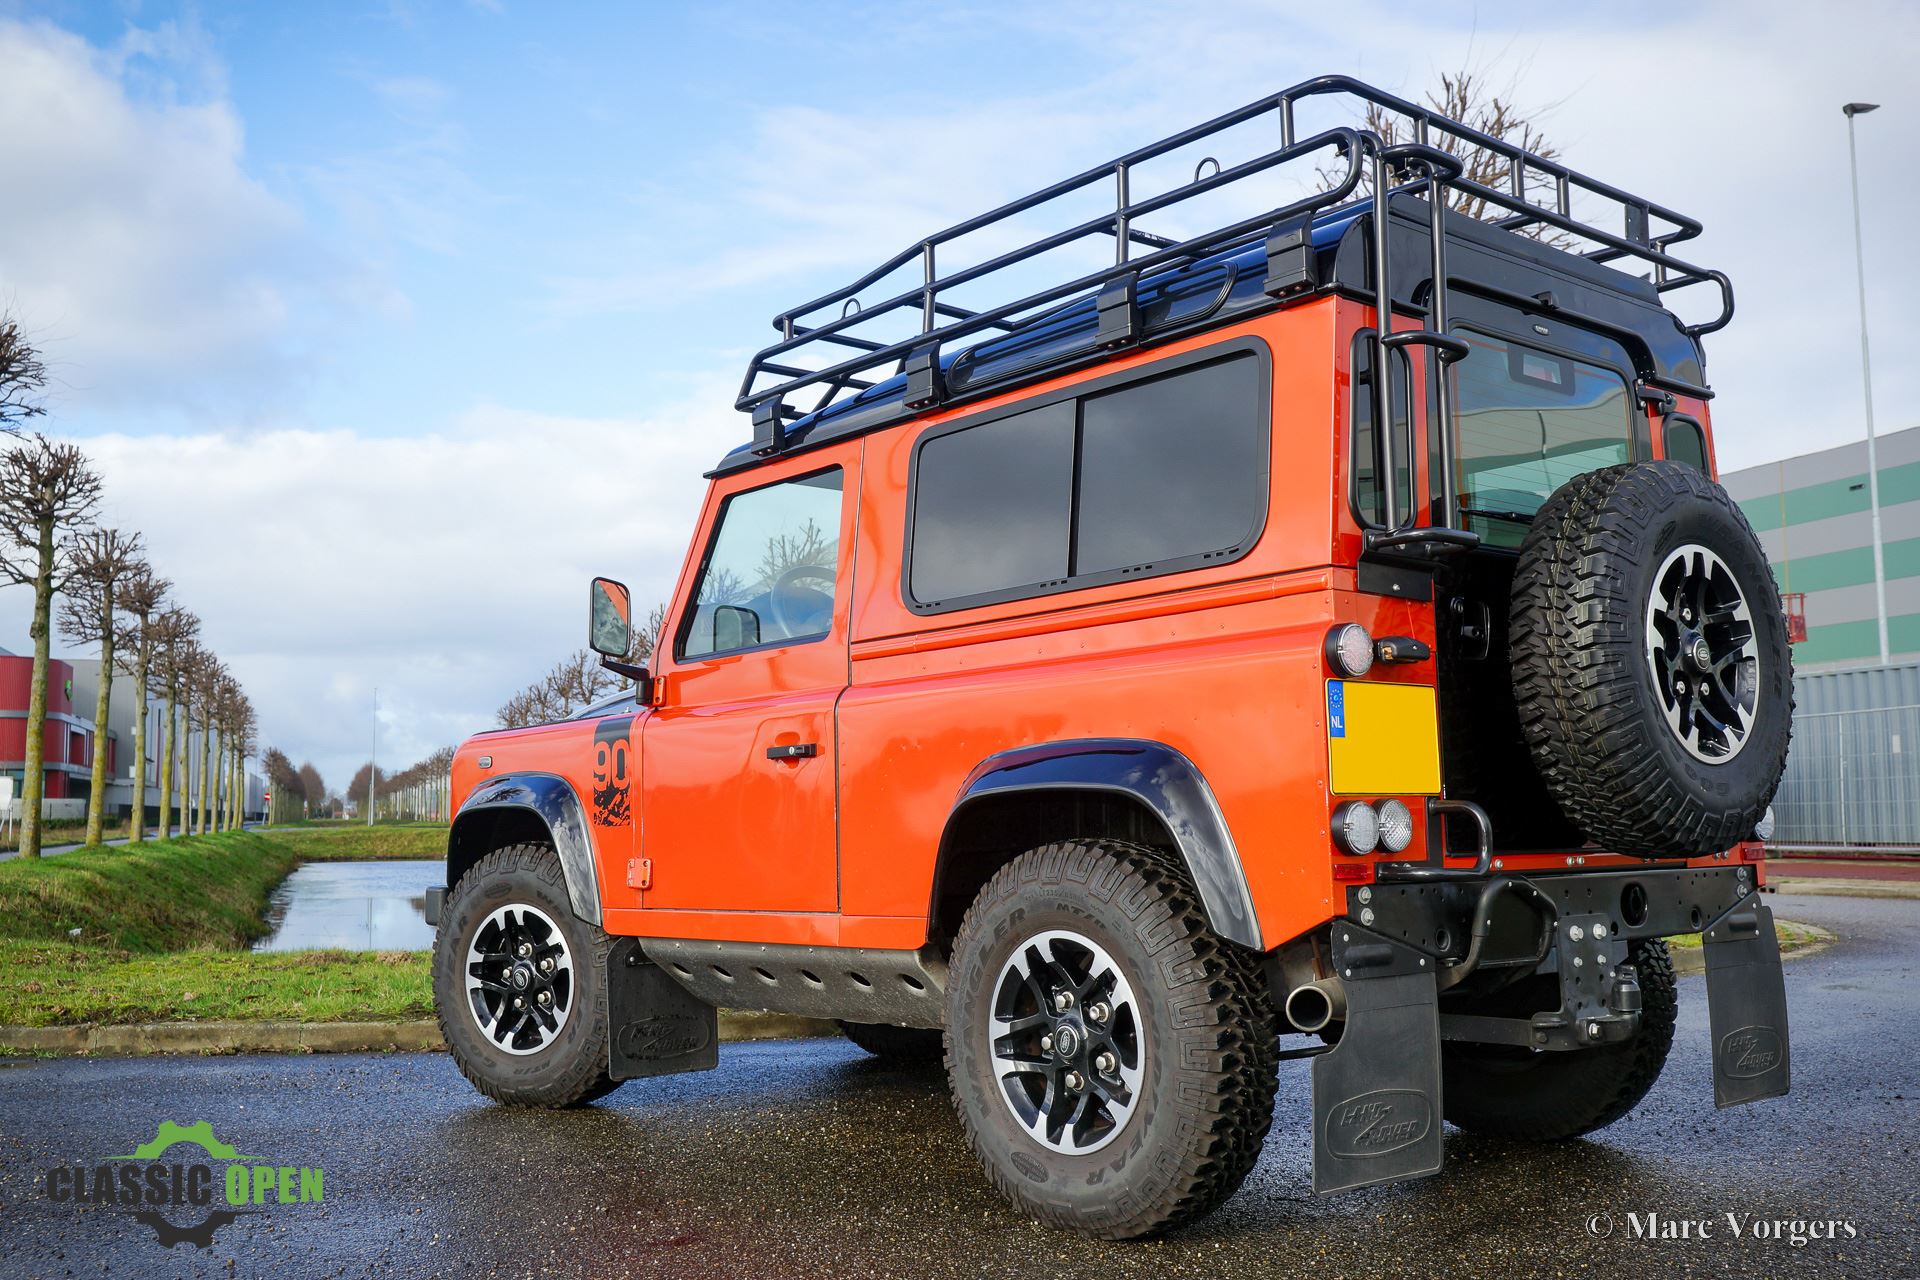 Land rover defender ofwwl gdylagy6acl84 3